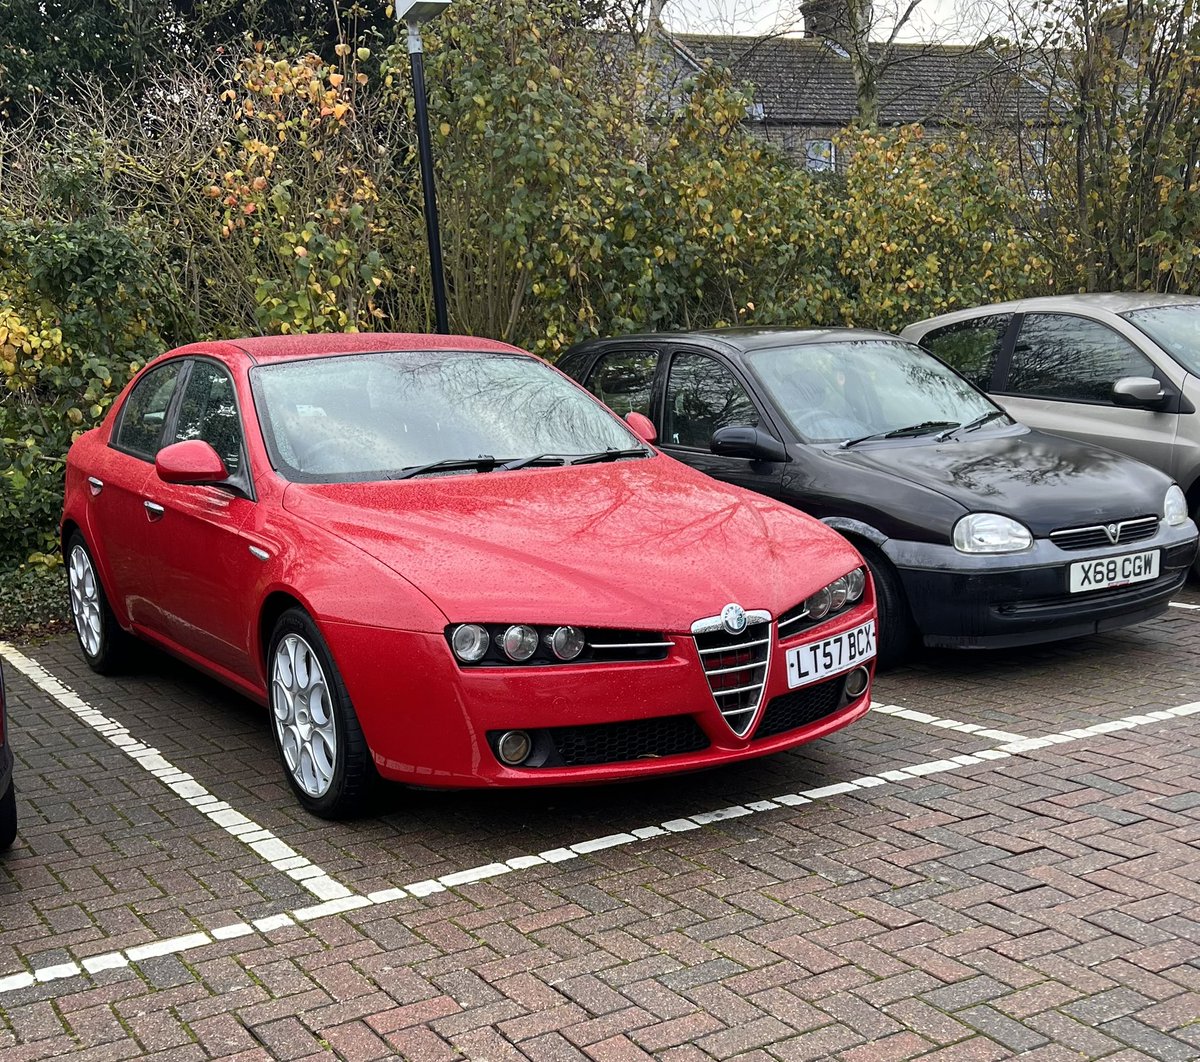 A rather splendid Alfa 159 spot today at the Doctors this was  superb and the corsa next to it wasn’t far off #weirdcartwitter